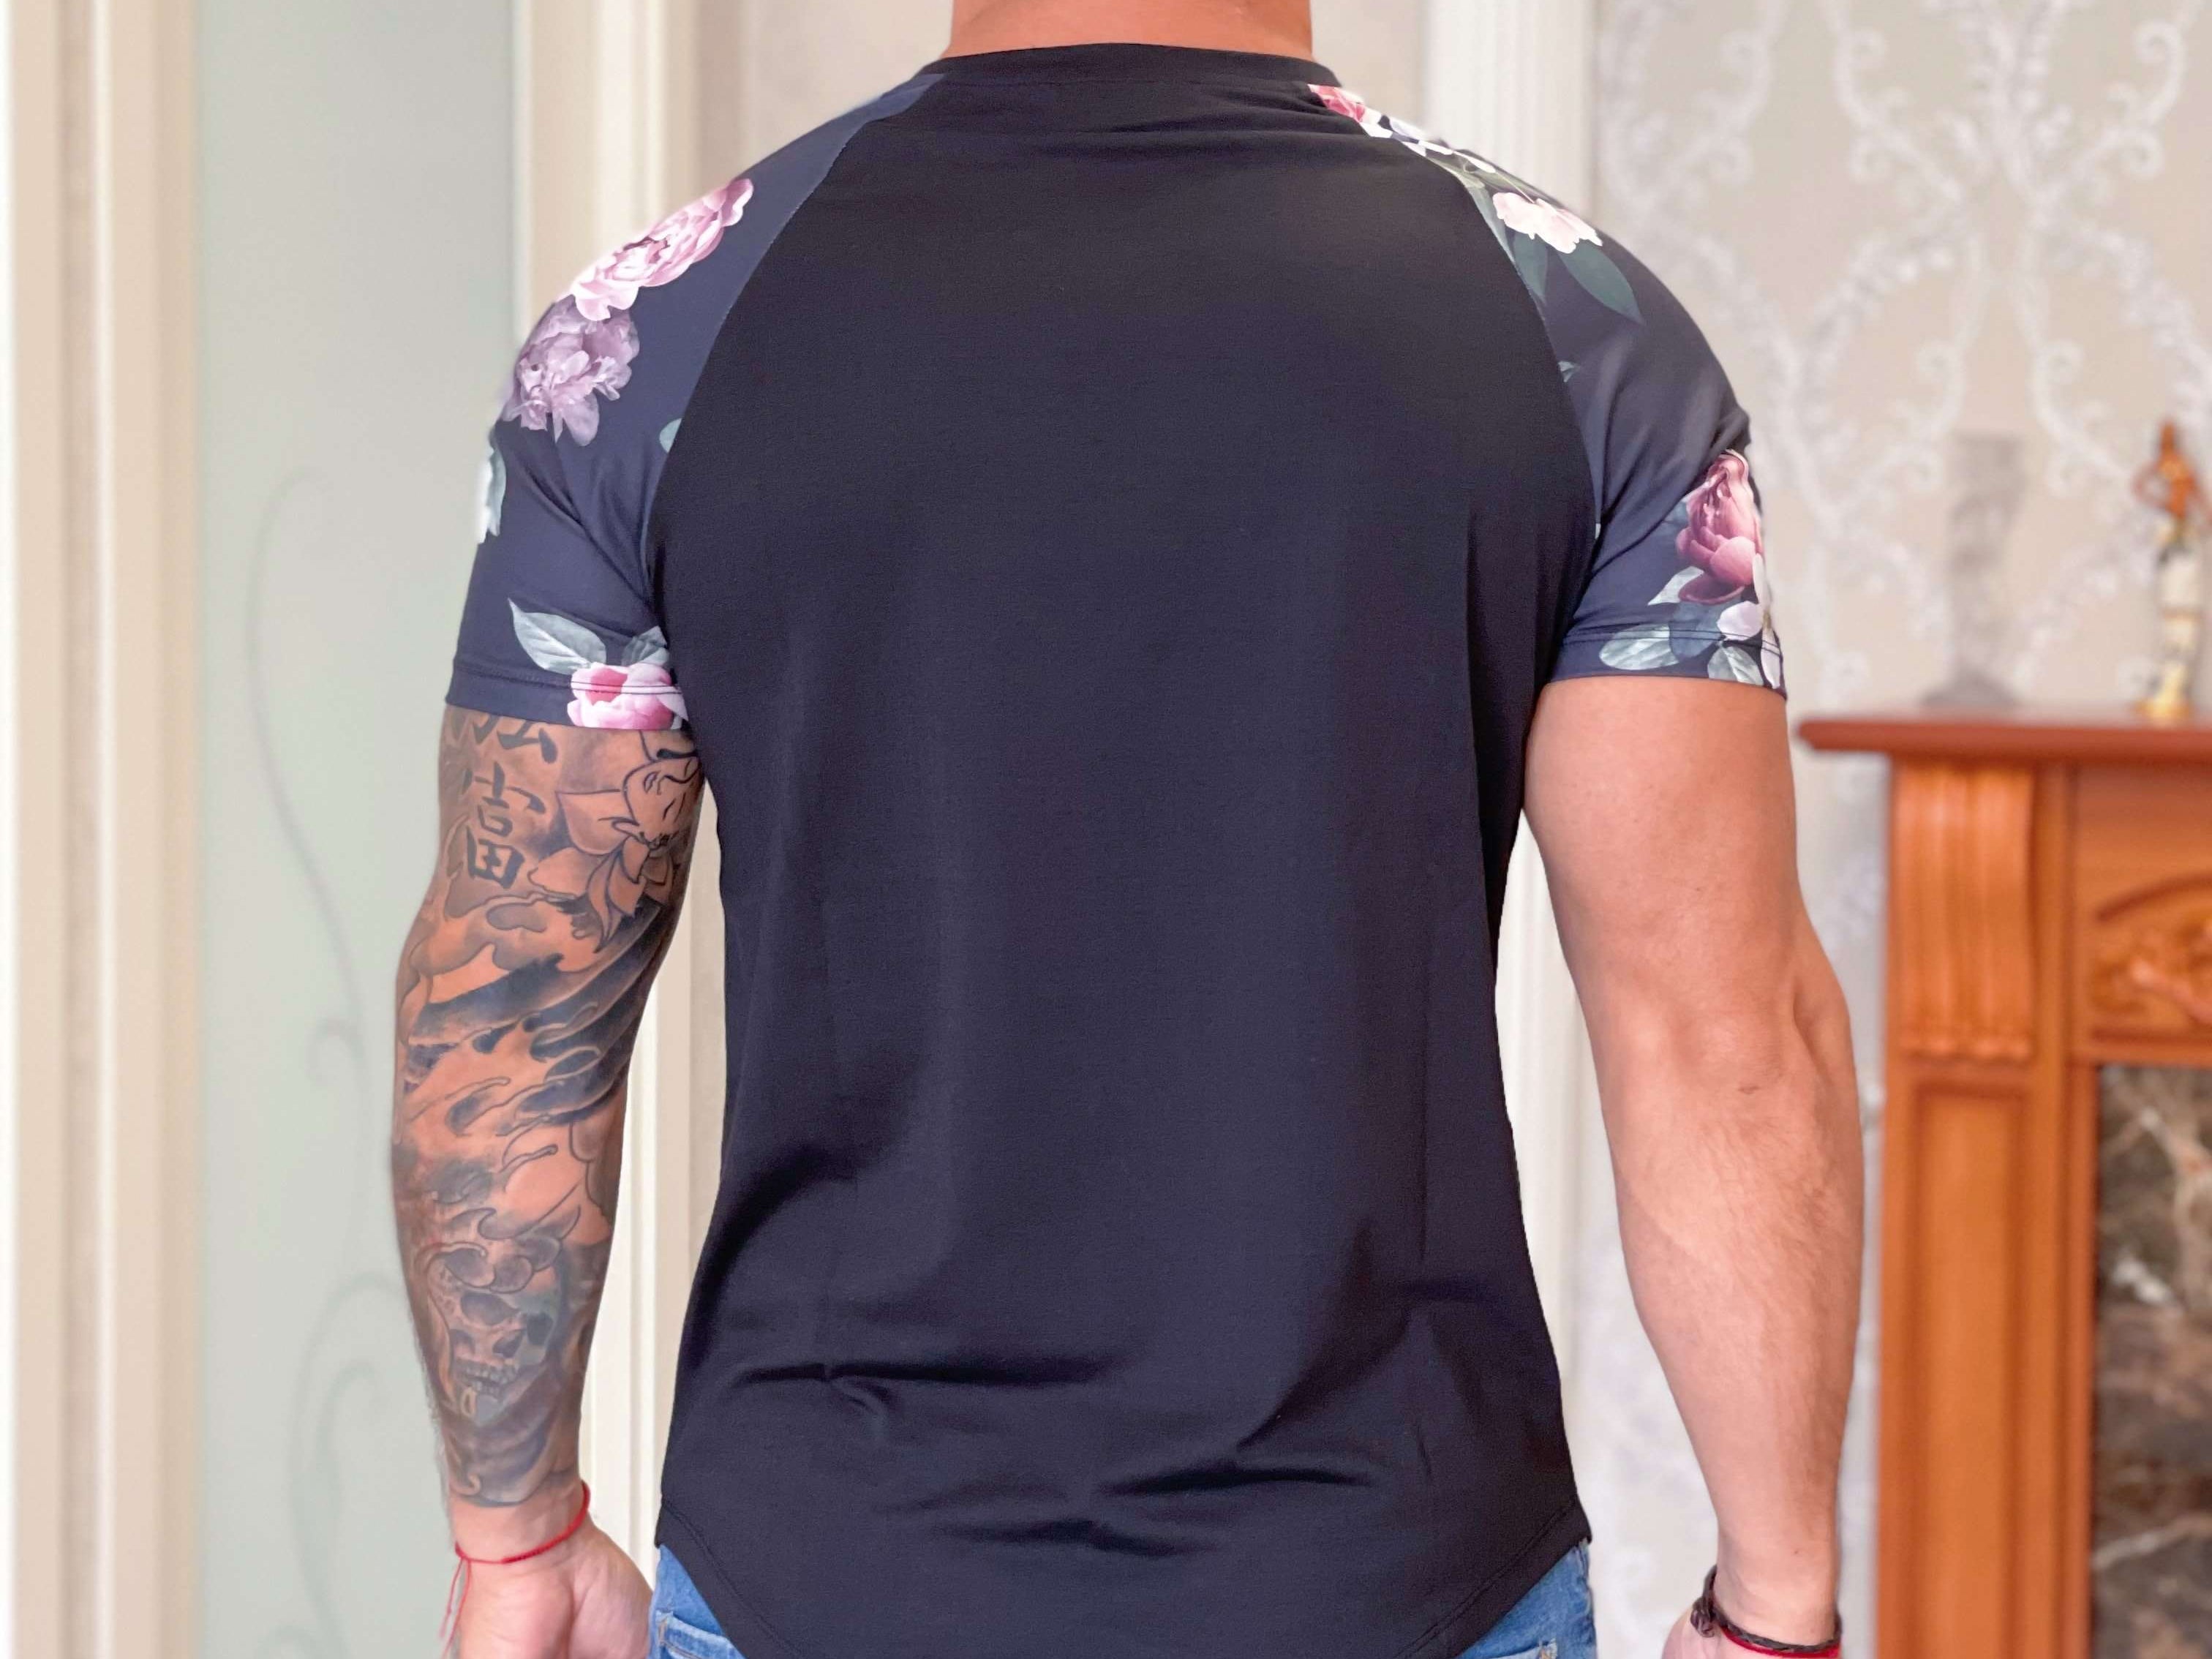 Naome - Black T-Shirt for Men (PRE-ORDER DISPATCH DATE 25 NOVEMBER 2021) - Sarman Fashion - Wholesale Clothing Fashion Brand for Men from Canada